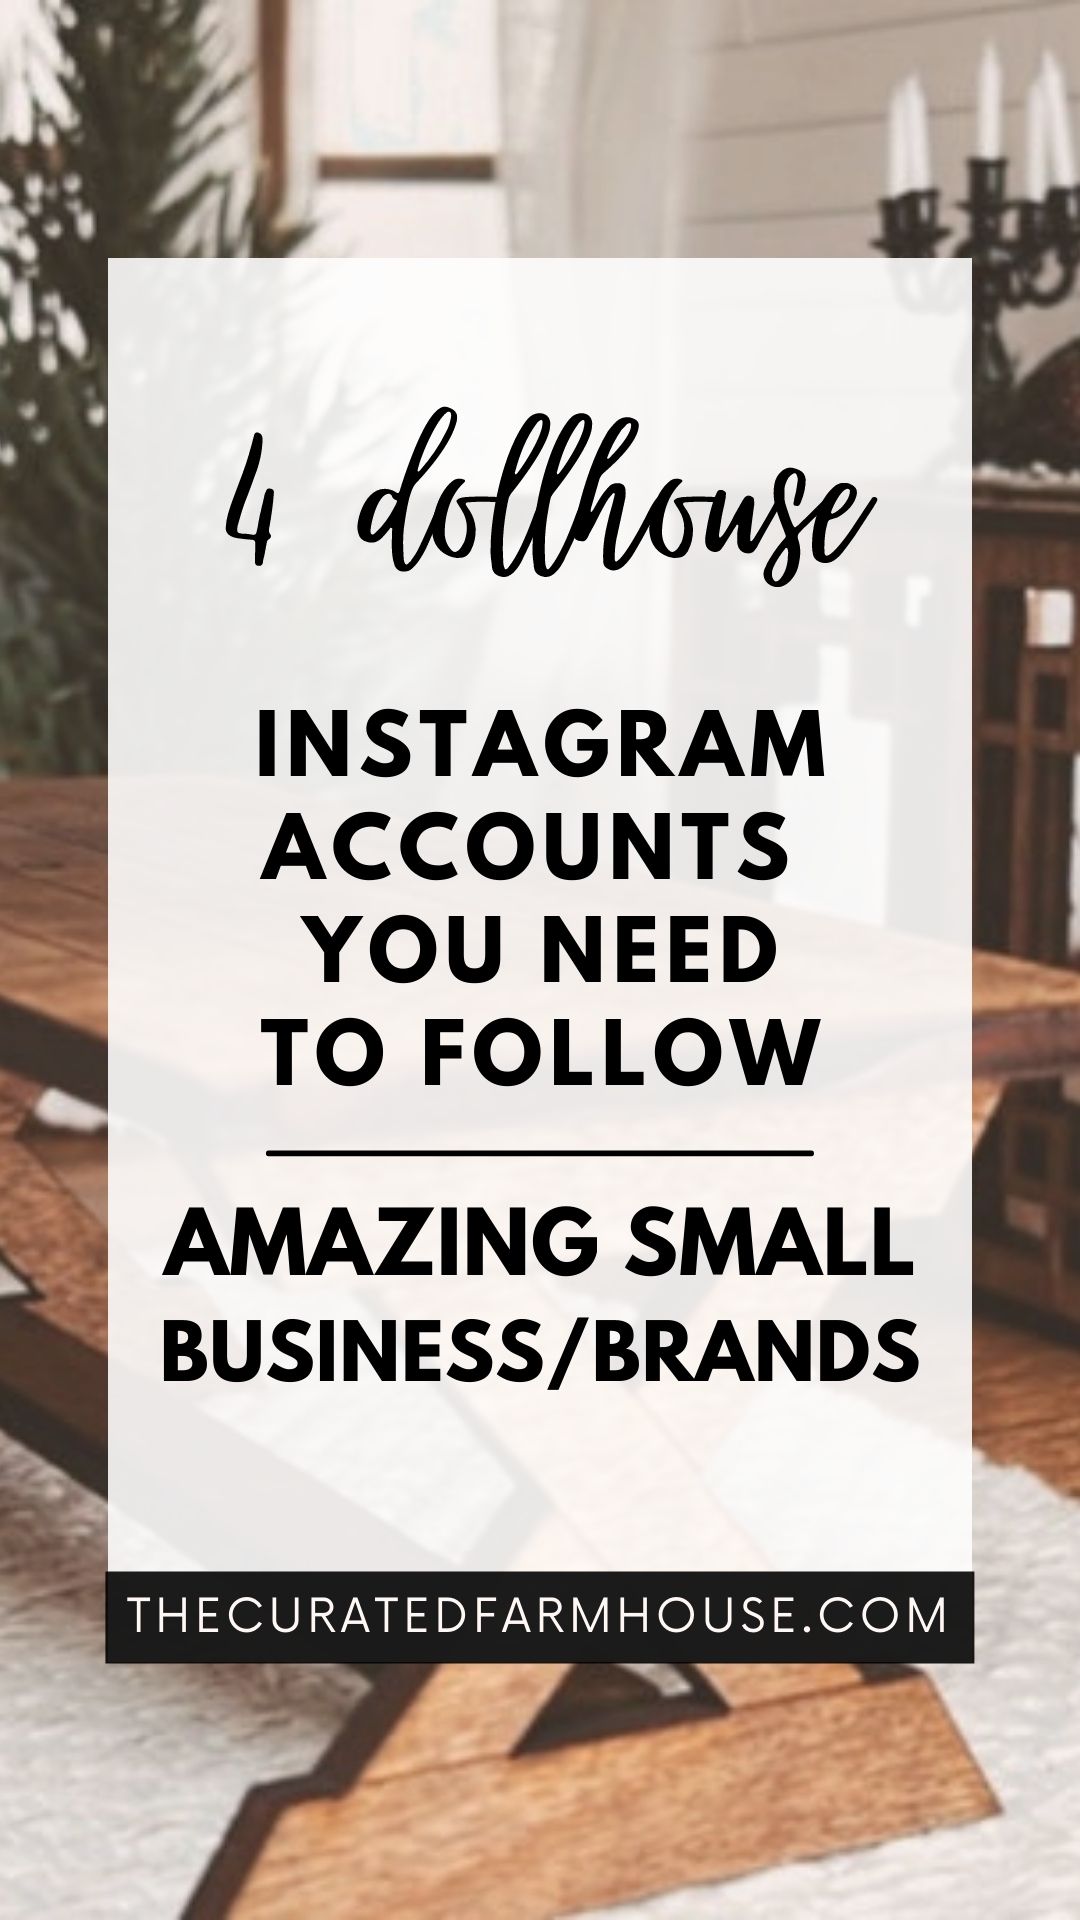 4 Dollhouse Instagram Accounts You Need to Follow